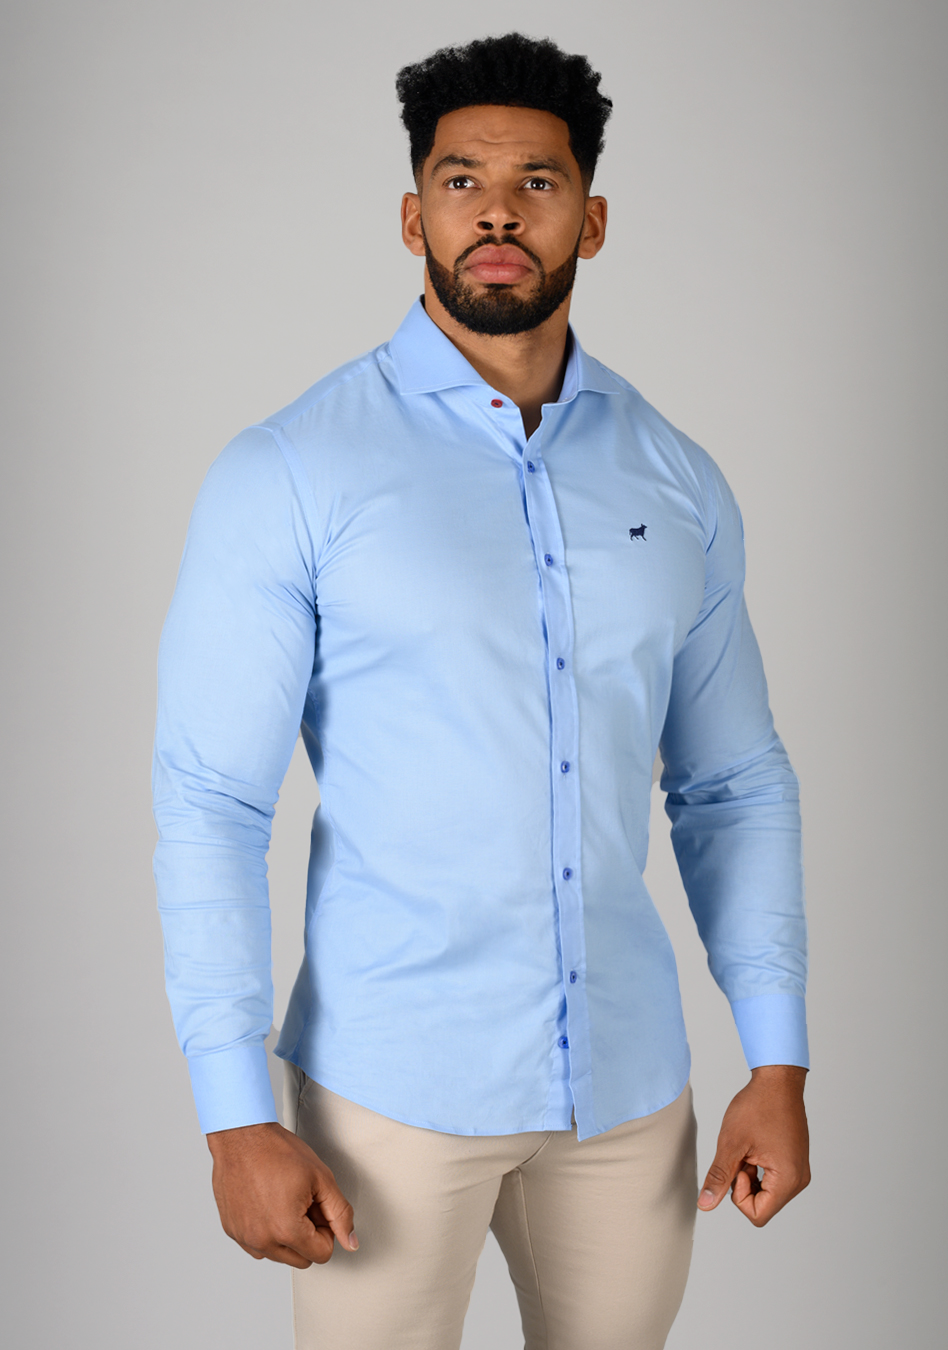 Light Blue muscle fit shirt on an athletically built model, showcasing the athletic fit design that enhances physique, with stretch fabric for comfort and mobility